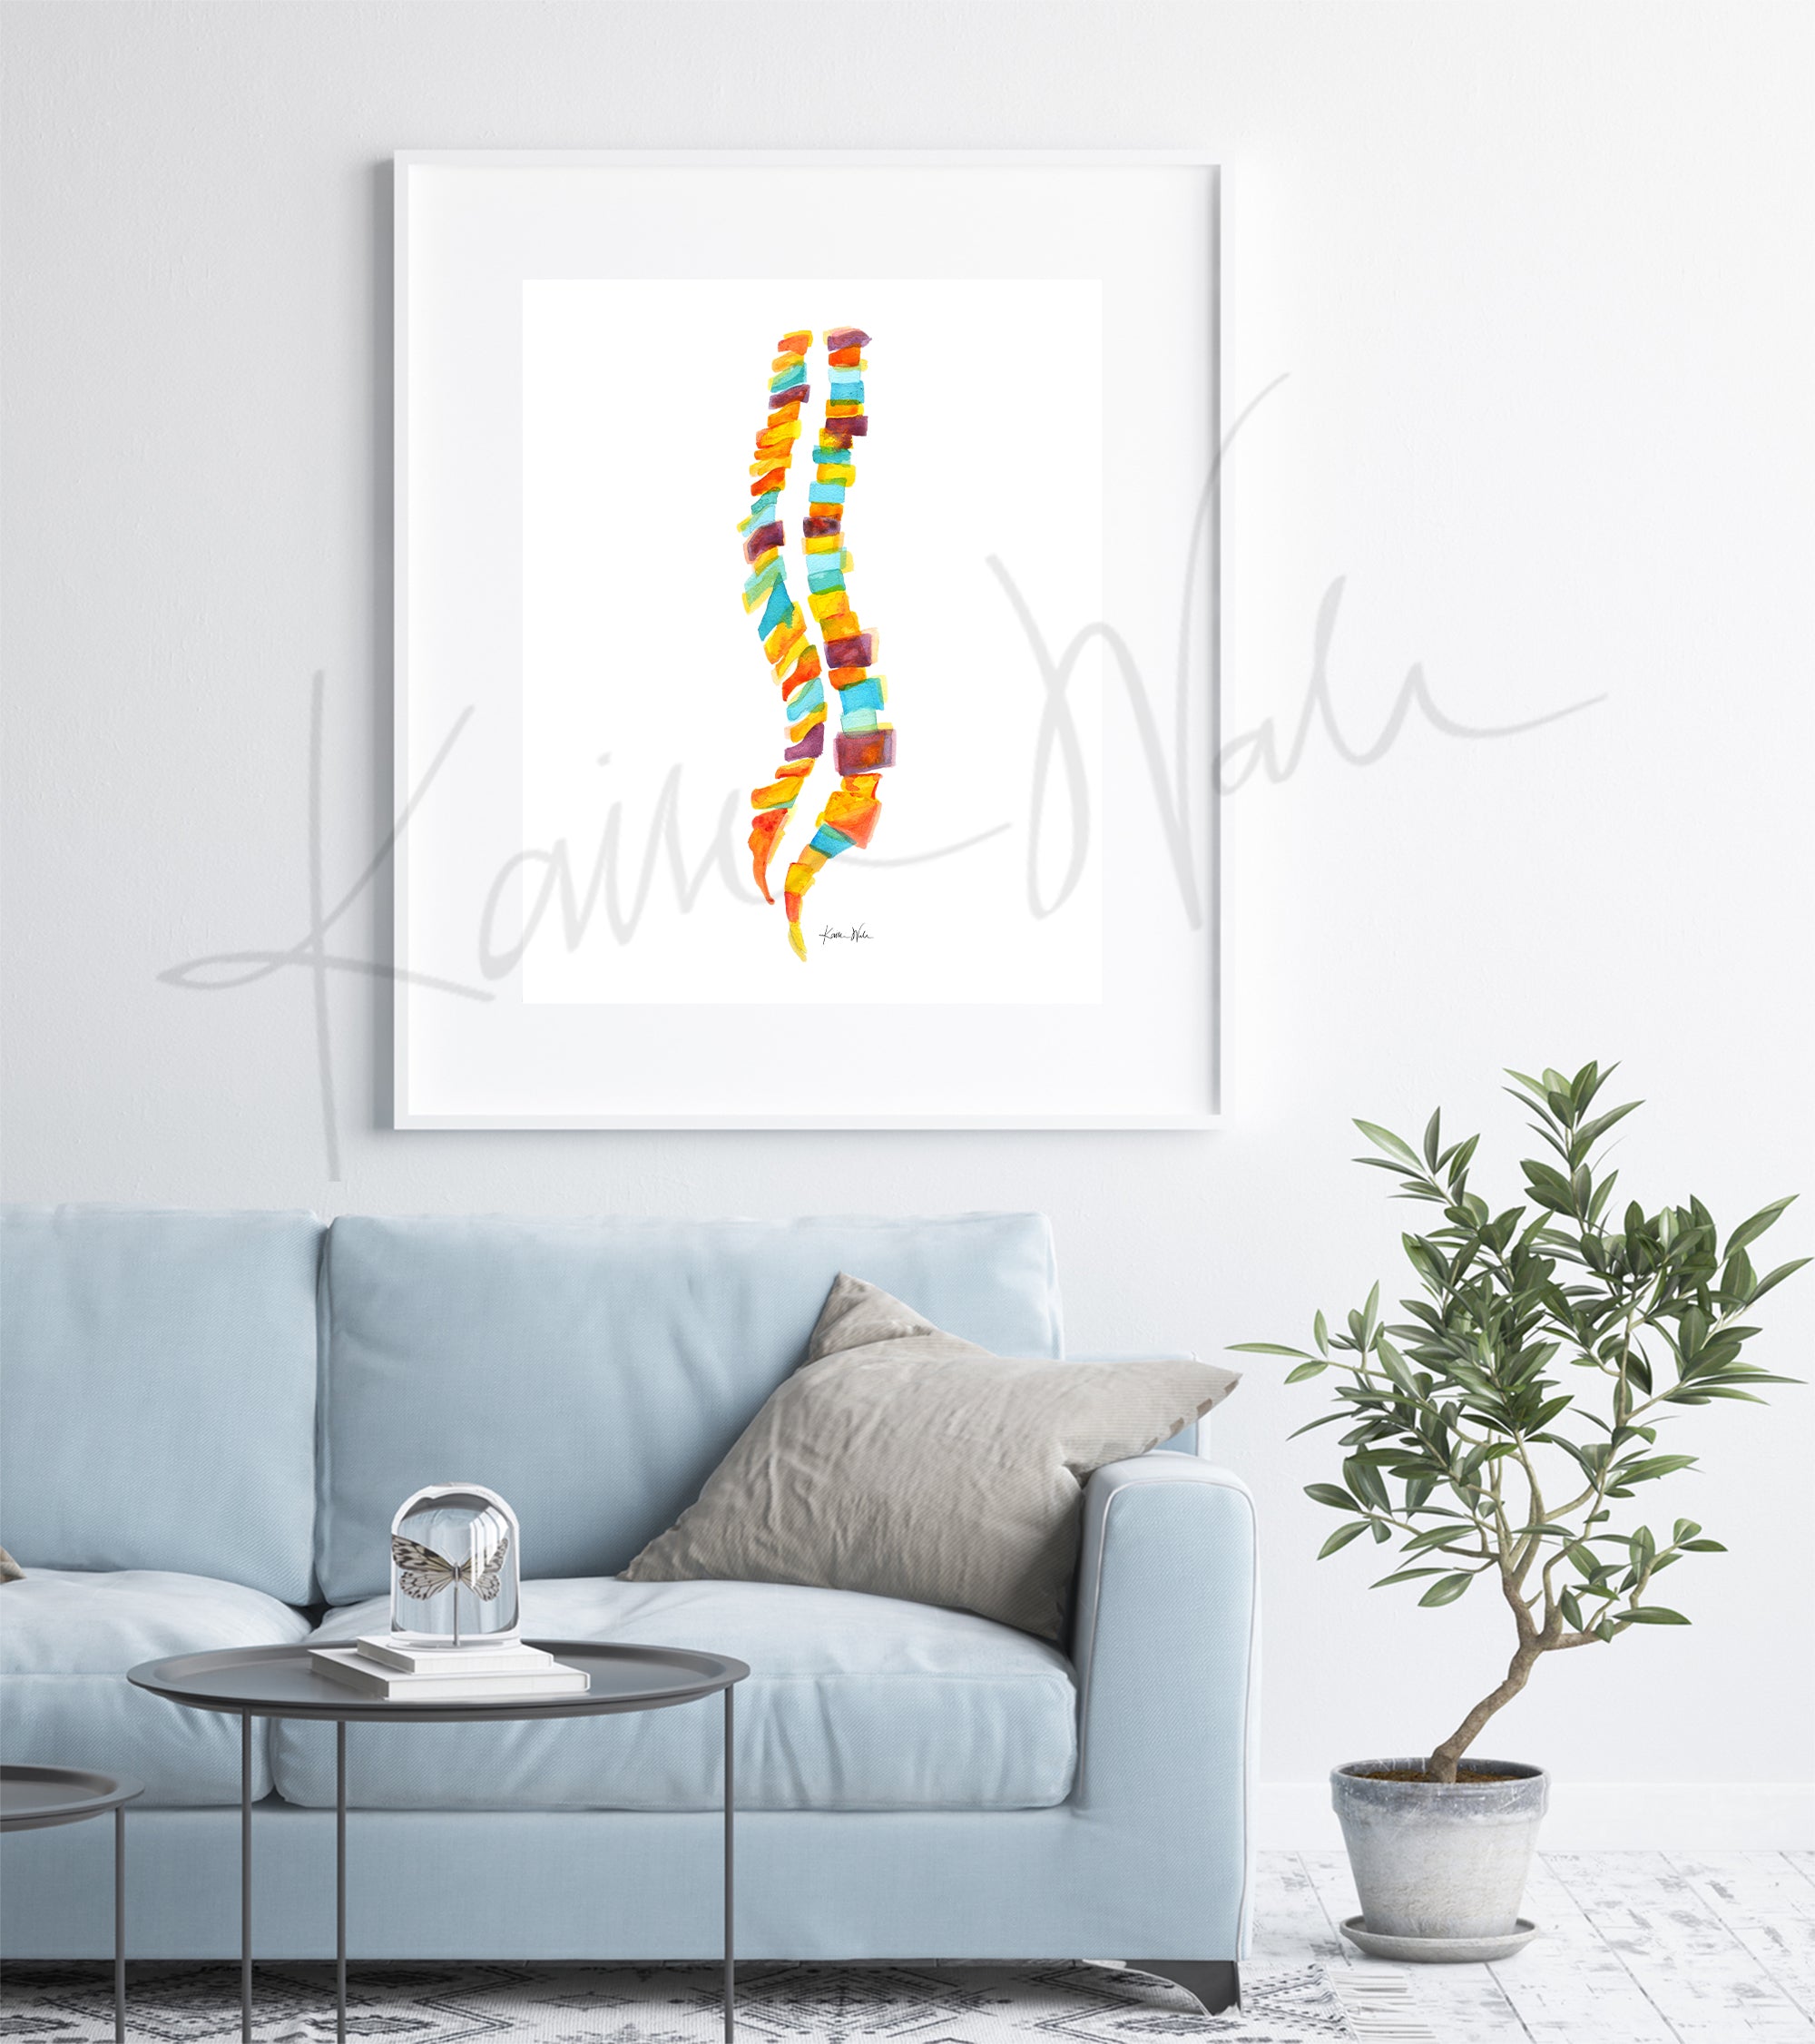 Framed watercolor painting of a spinal columns in yellow, orange, burgundy and teal. The painting hangs over a blue couch.